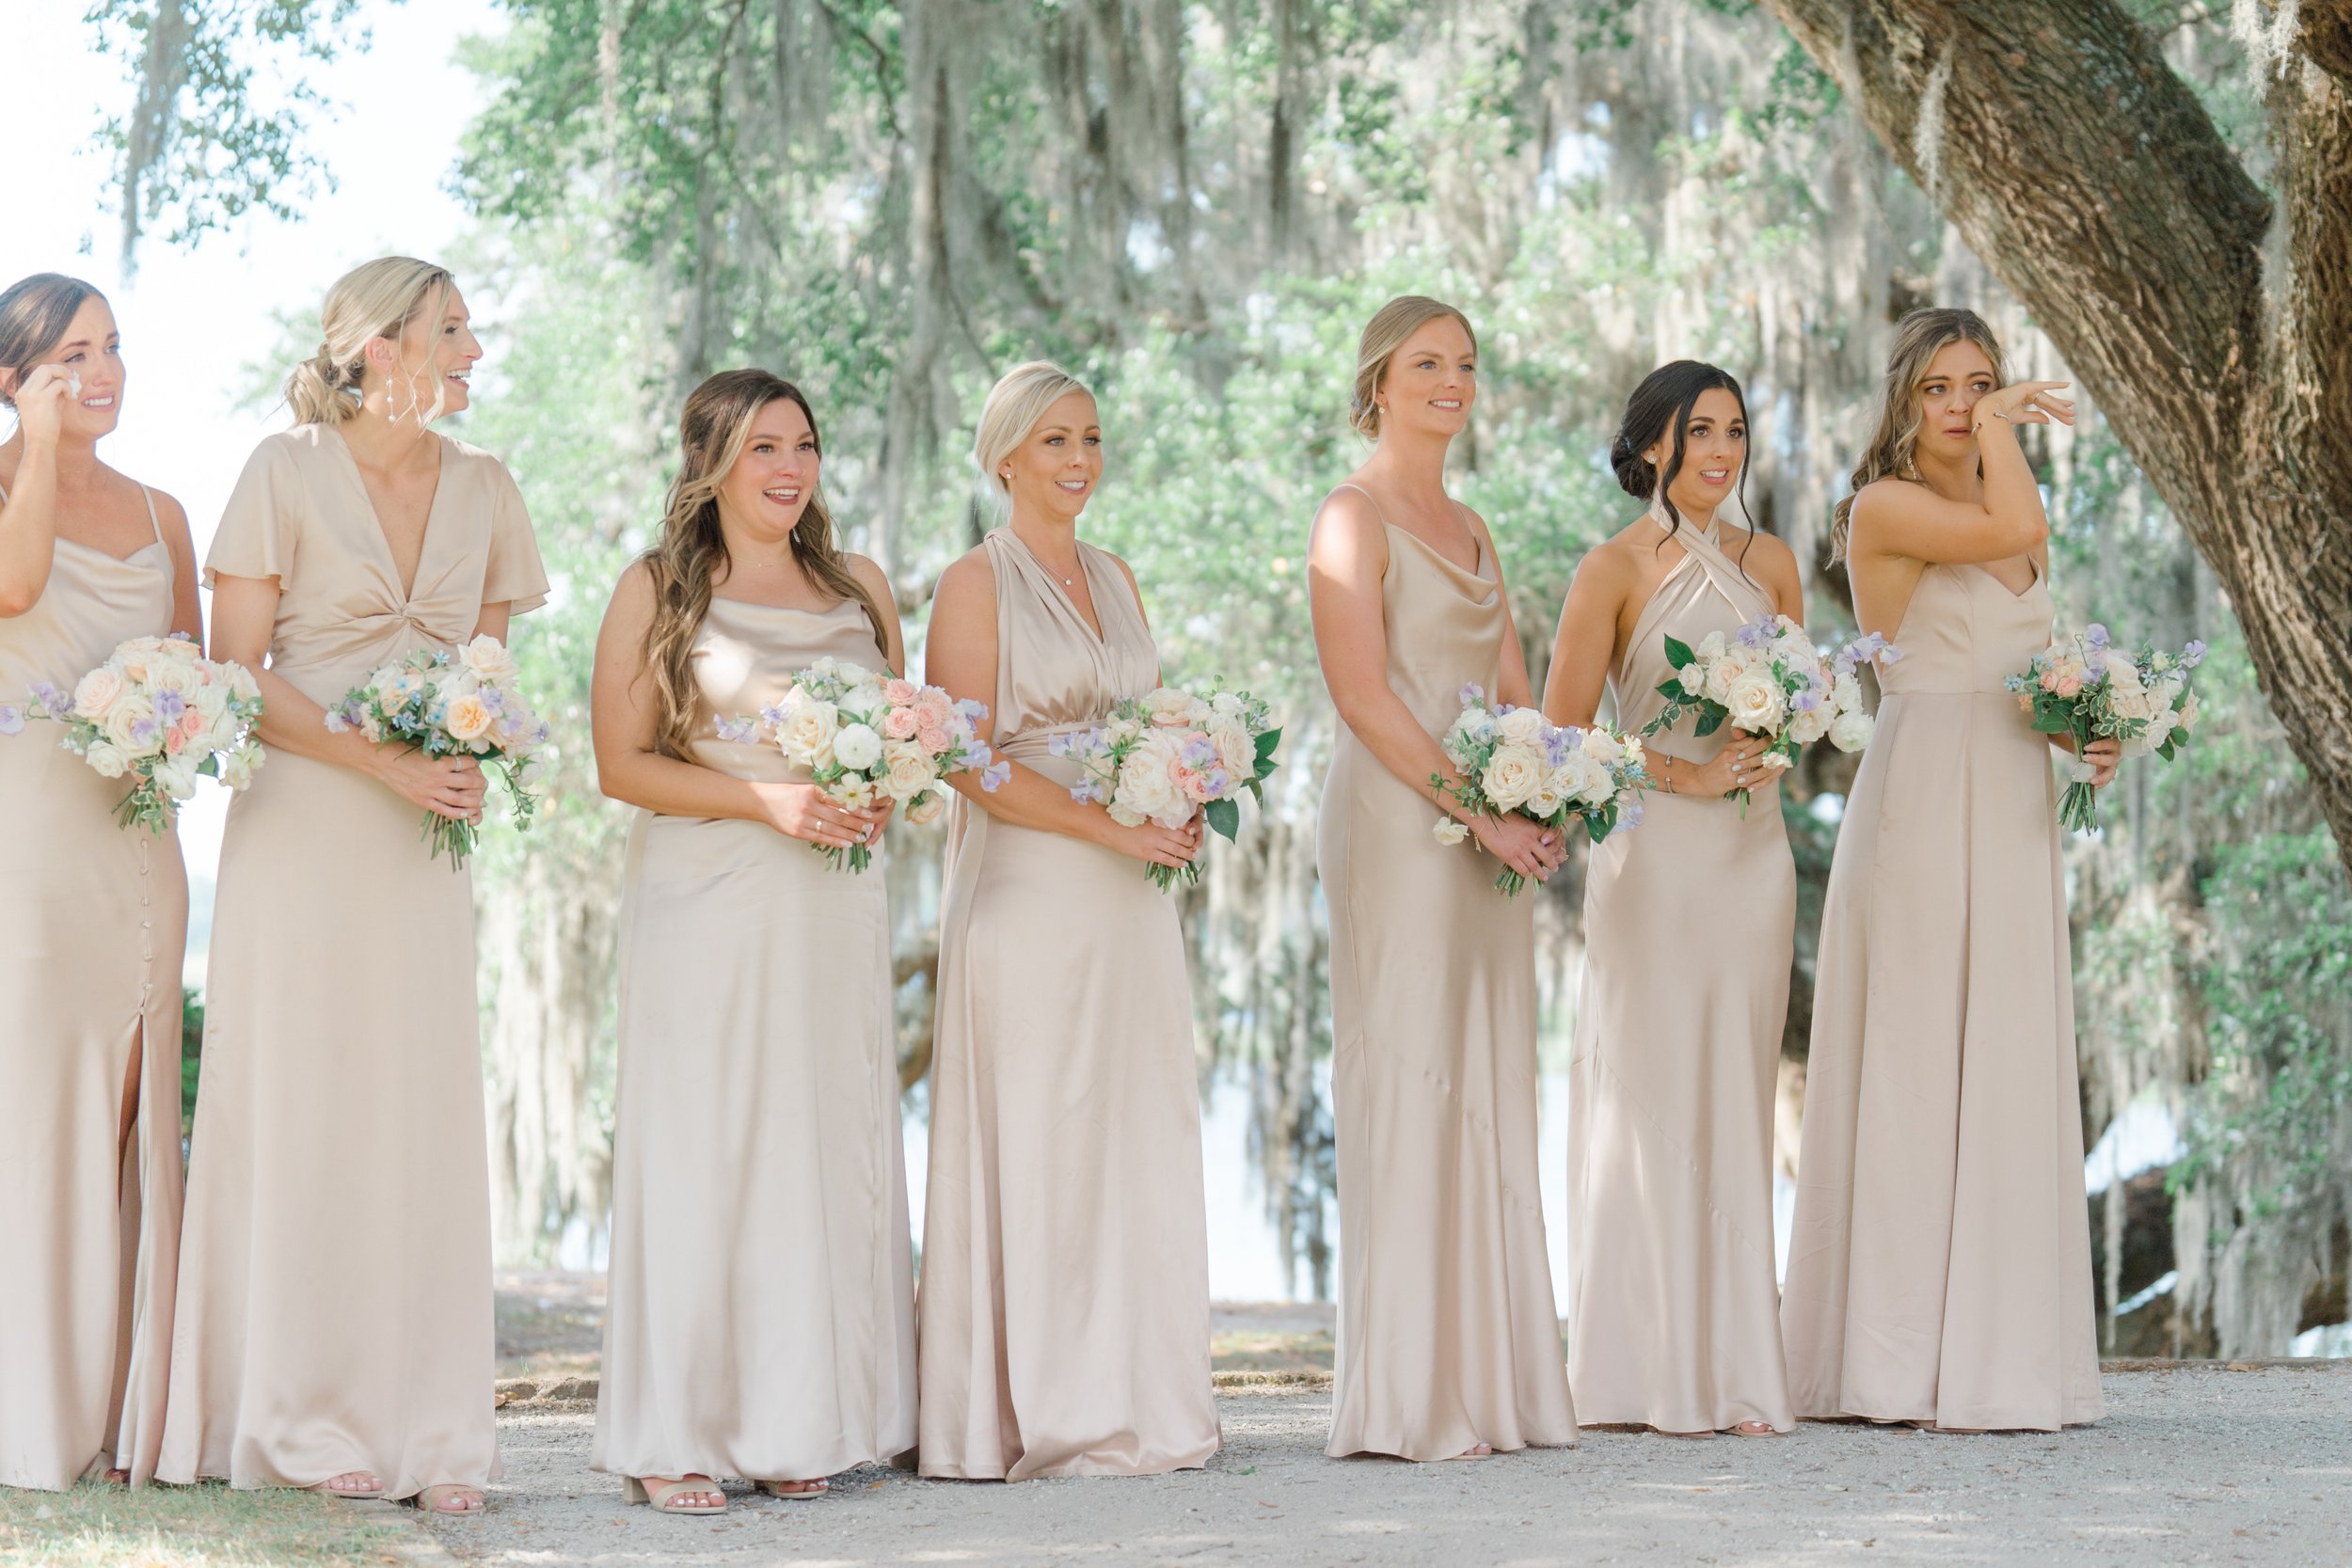 Happy and emotional bridesmaids in champagne dresses at wedding ceremony.